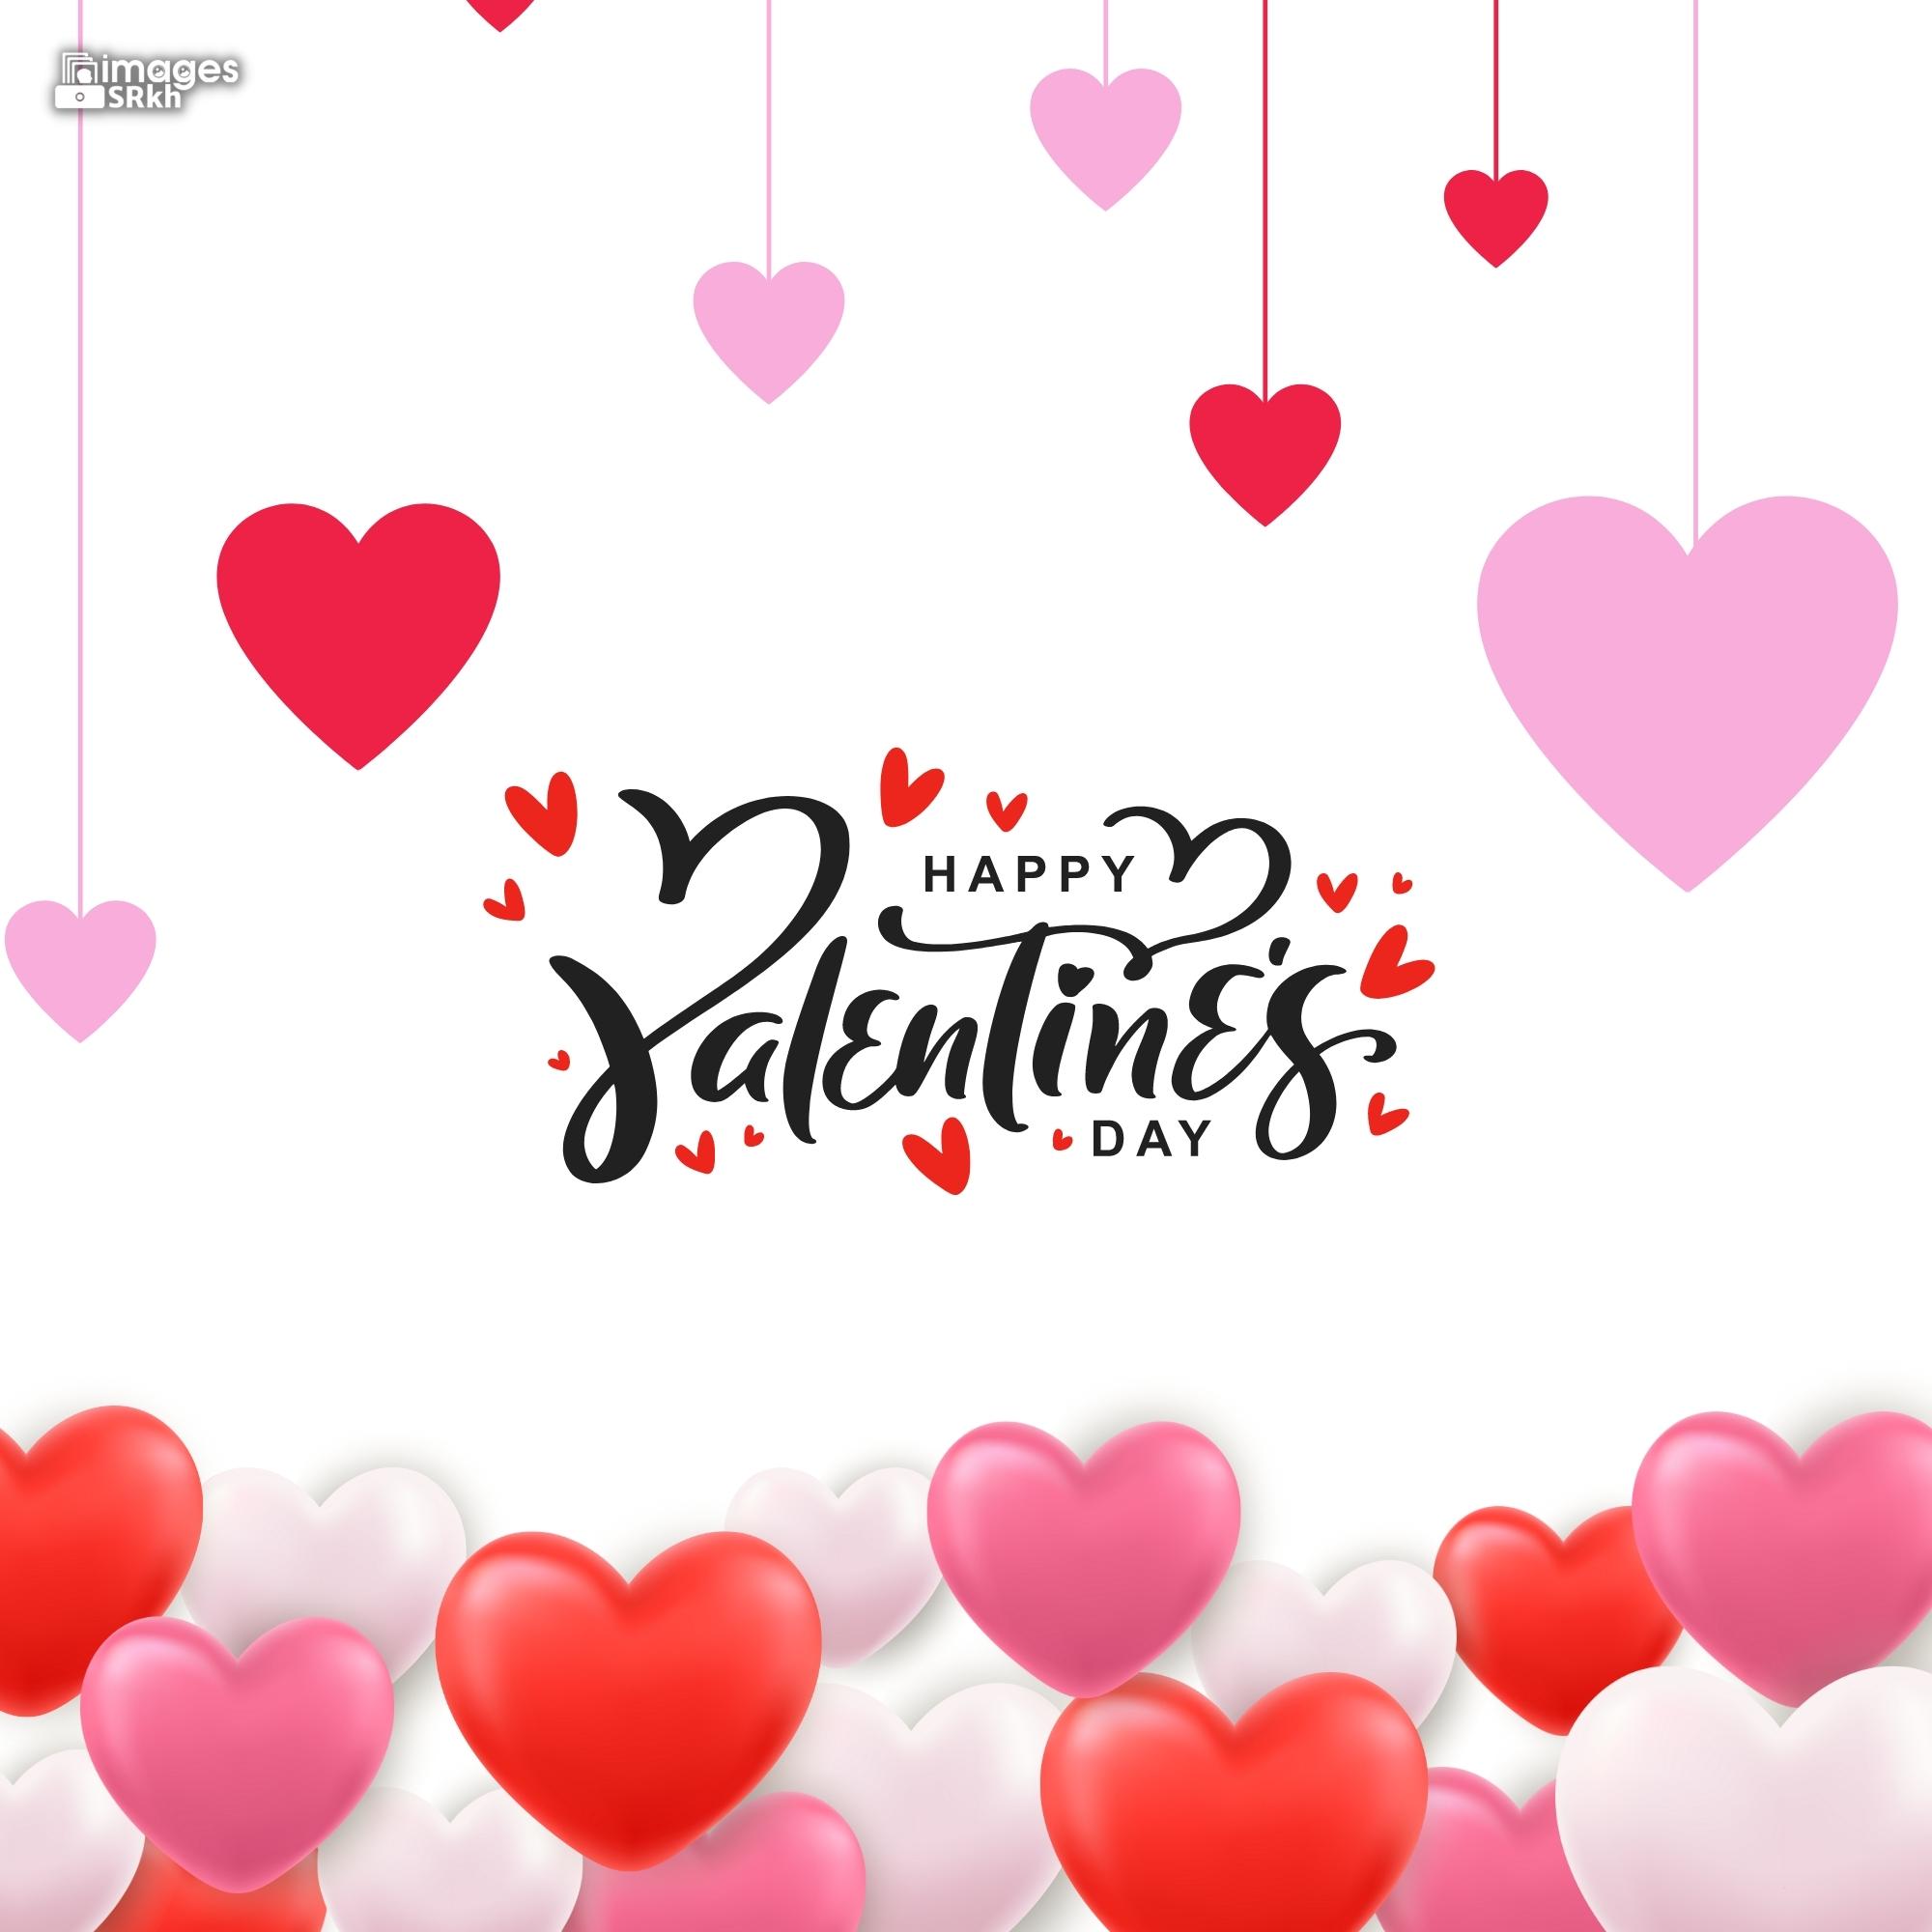 Happy Valentines Day | 425 | PREMIUM IMAGES | Wishes for Love